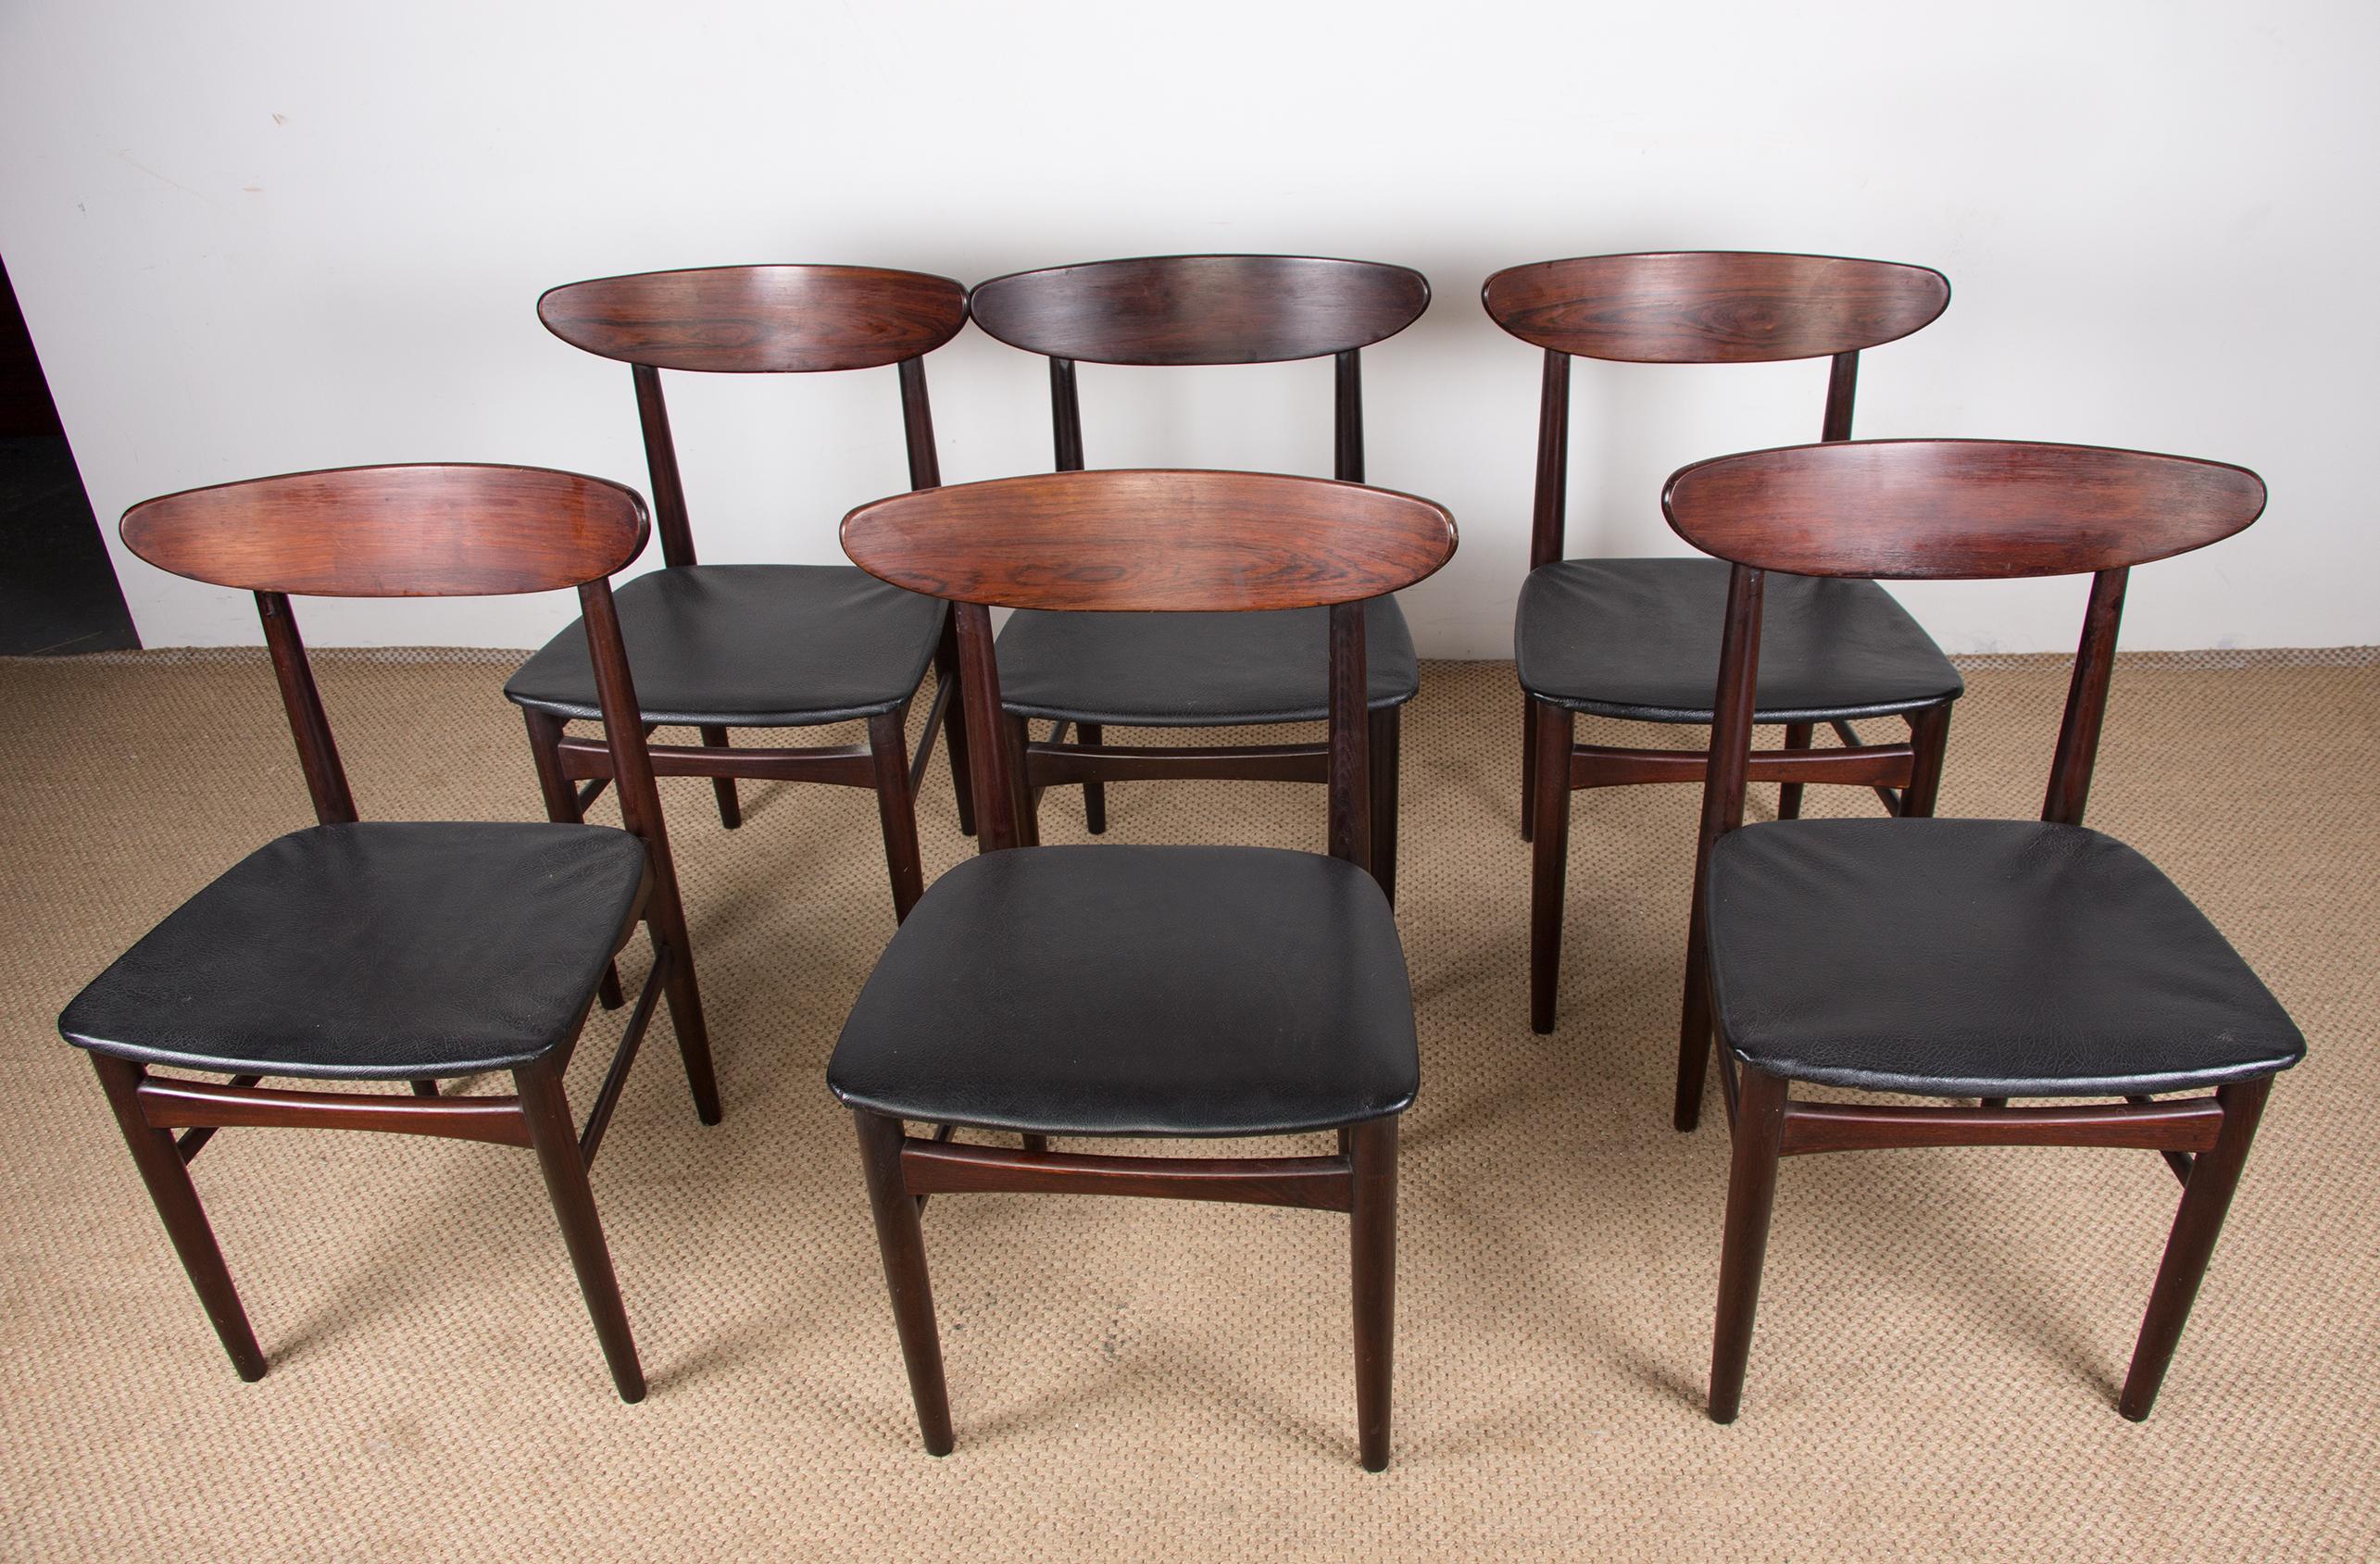 Series of 6 Danish Chairs in Rosewood and Skai by Dyrlund, 1960 9